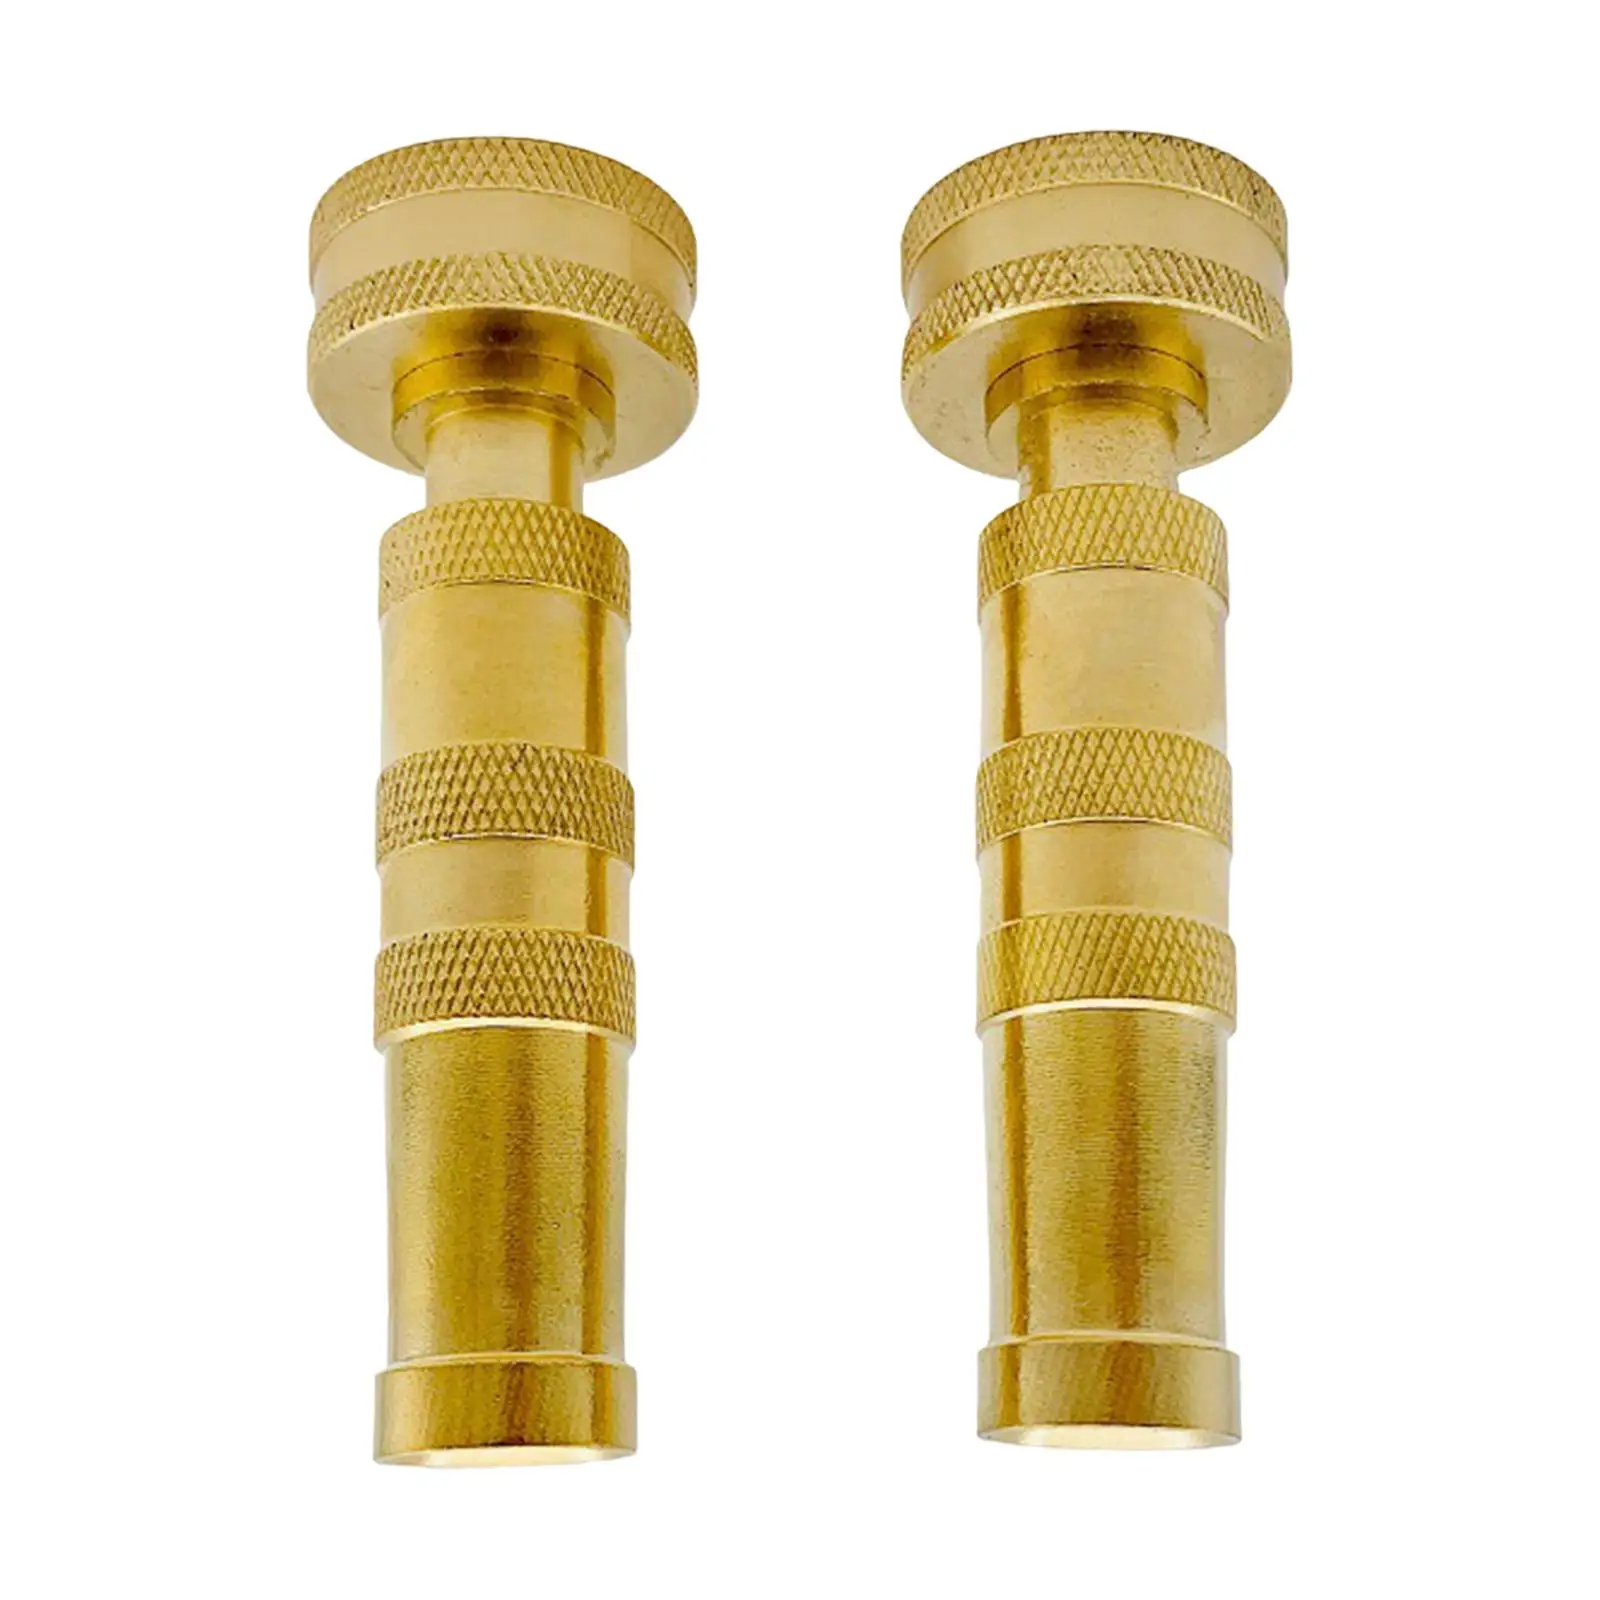 2 Pieces Brass Hose Nozzles Multipurpose 1/2`` Thread Inlet High Pressure Hose Nozzles for Driveway Plant Furniture Siding Lawn